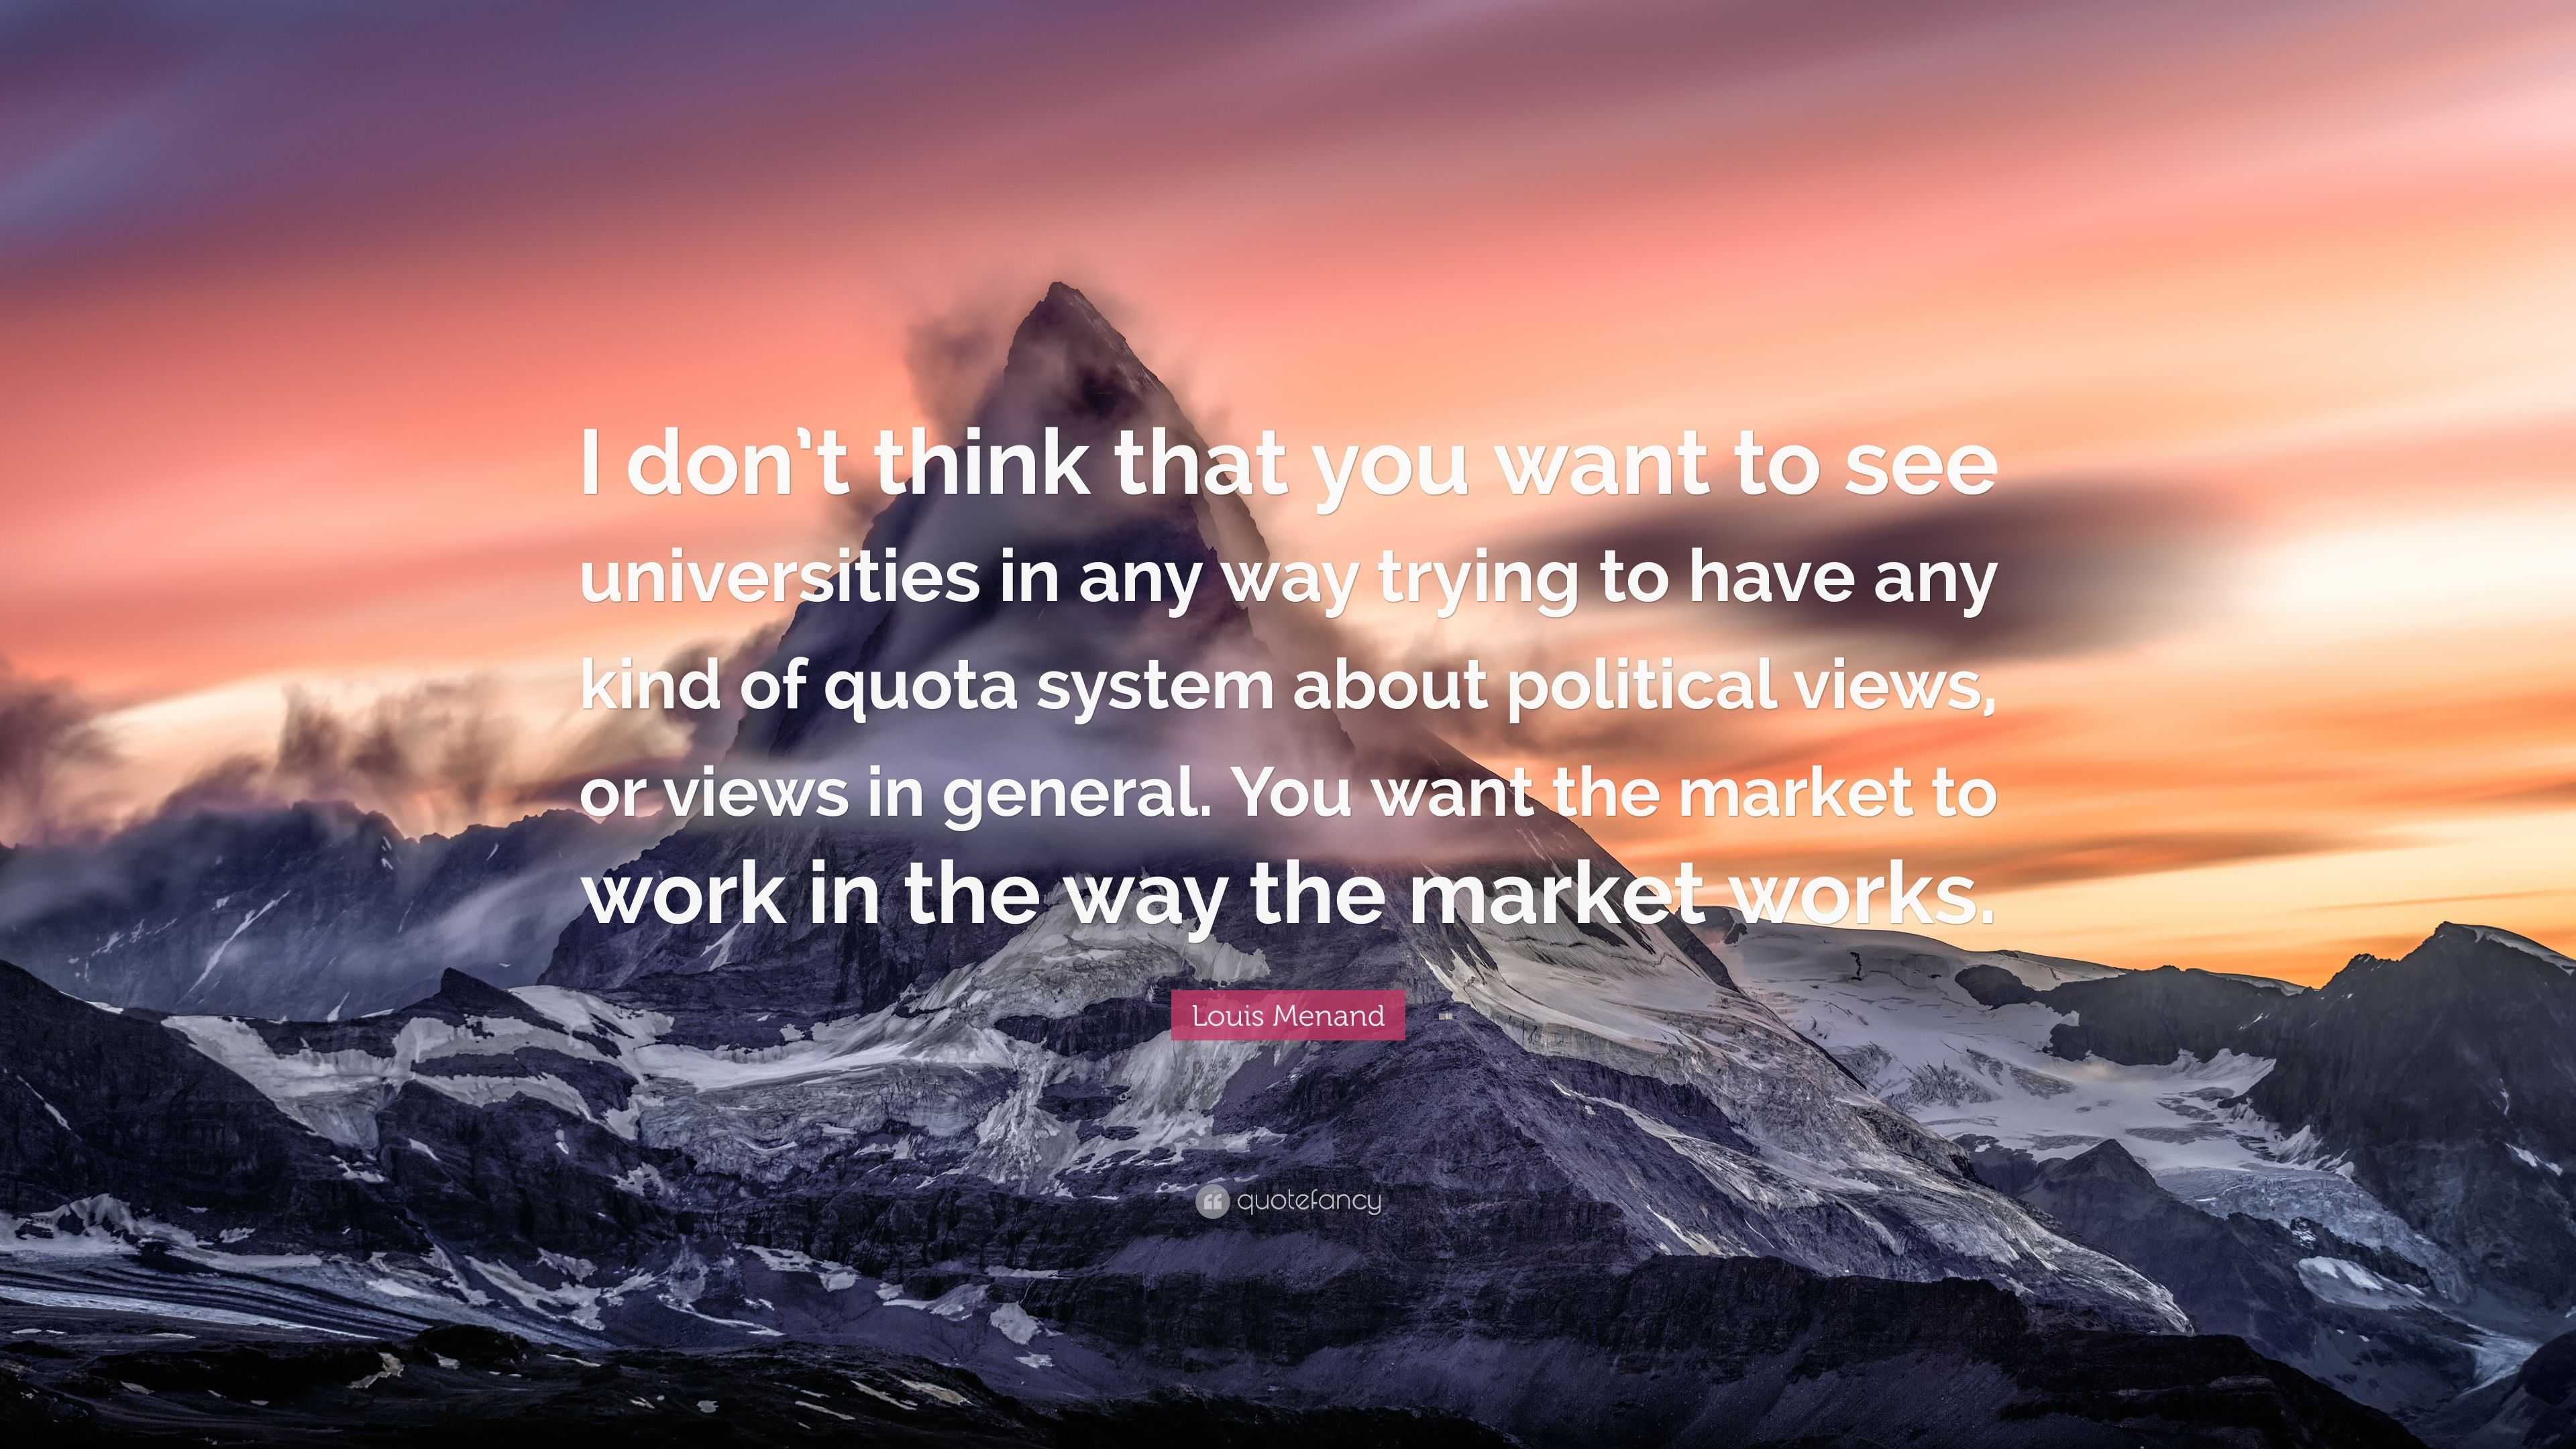 Louis Menand Quote: “I don’t think that you want to see universities in any way trying to have ...